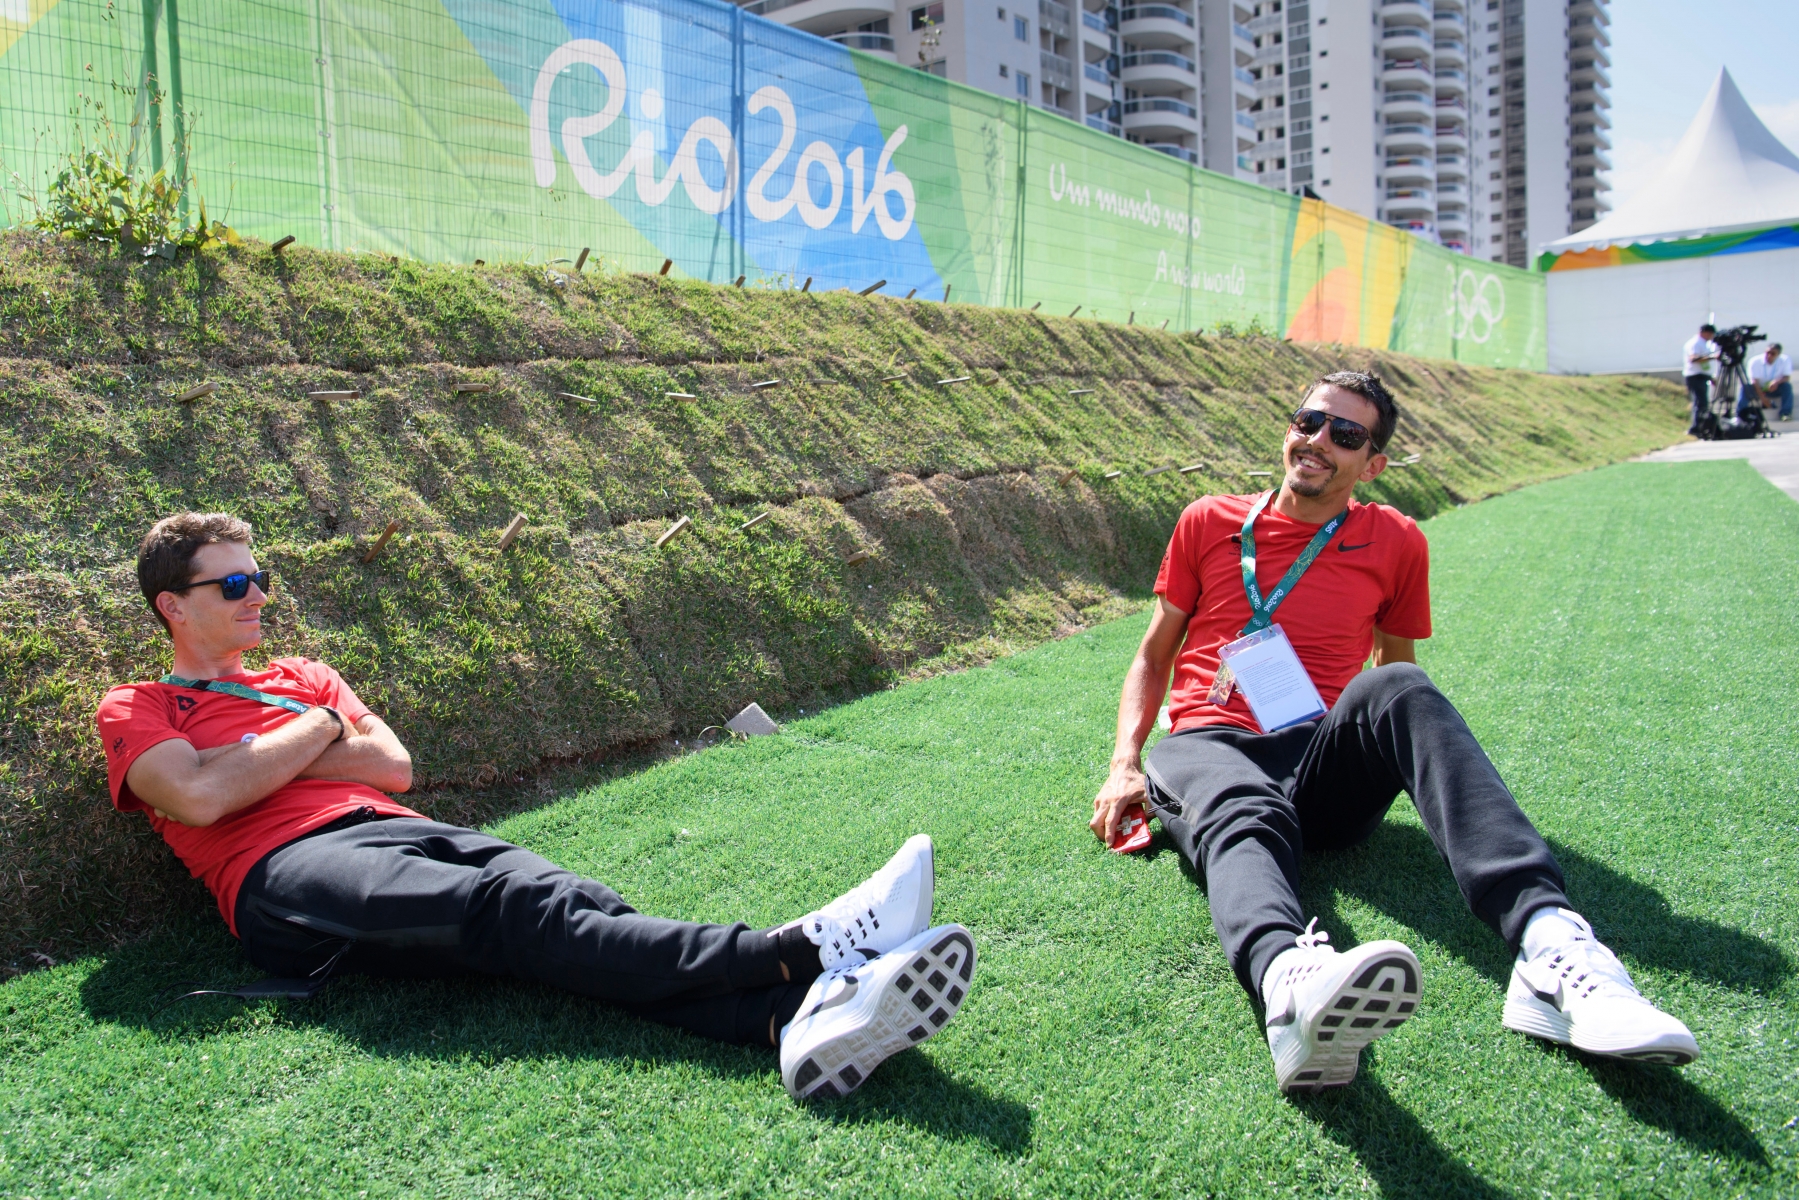 Sebastien Reichenbach, left, and Steve Morabito, right, cyclists of Switzerland, relax during the welcome ceremony of the Team Switzerland in the Olympic Media Village in Rio de Janeiro, Brazil, prior to the Rio 2016 Olympic Summer Games, pictured on Tuesday, August 2, 2016. (KEYSTONE/Laurent Gillieron)d OLYMPIA RIO 2016 TEAM SCHWEIZ